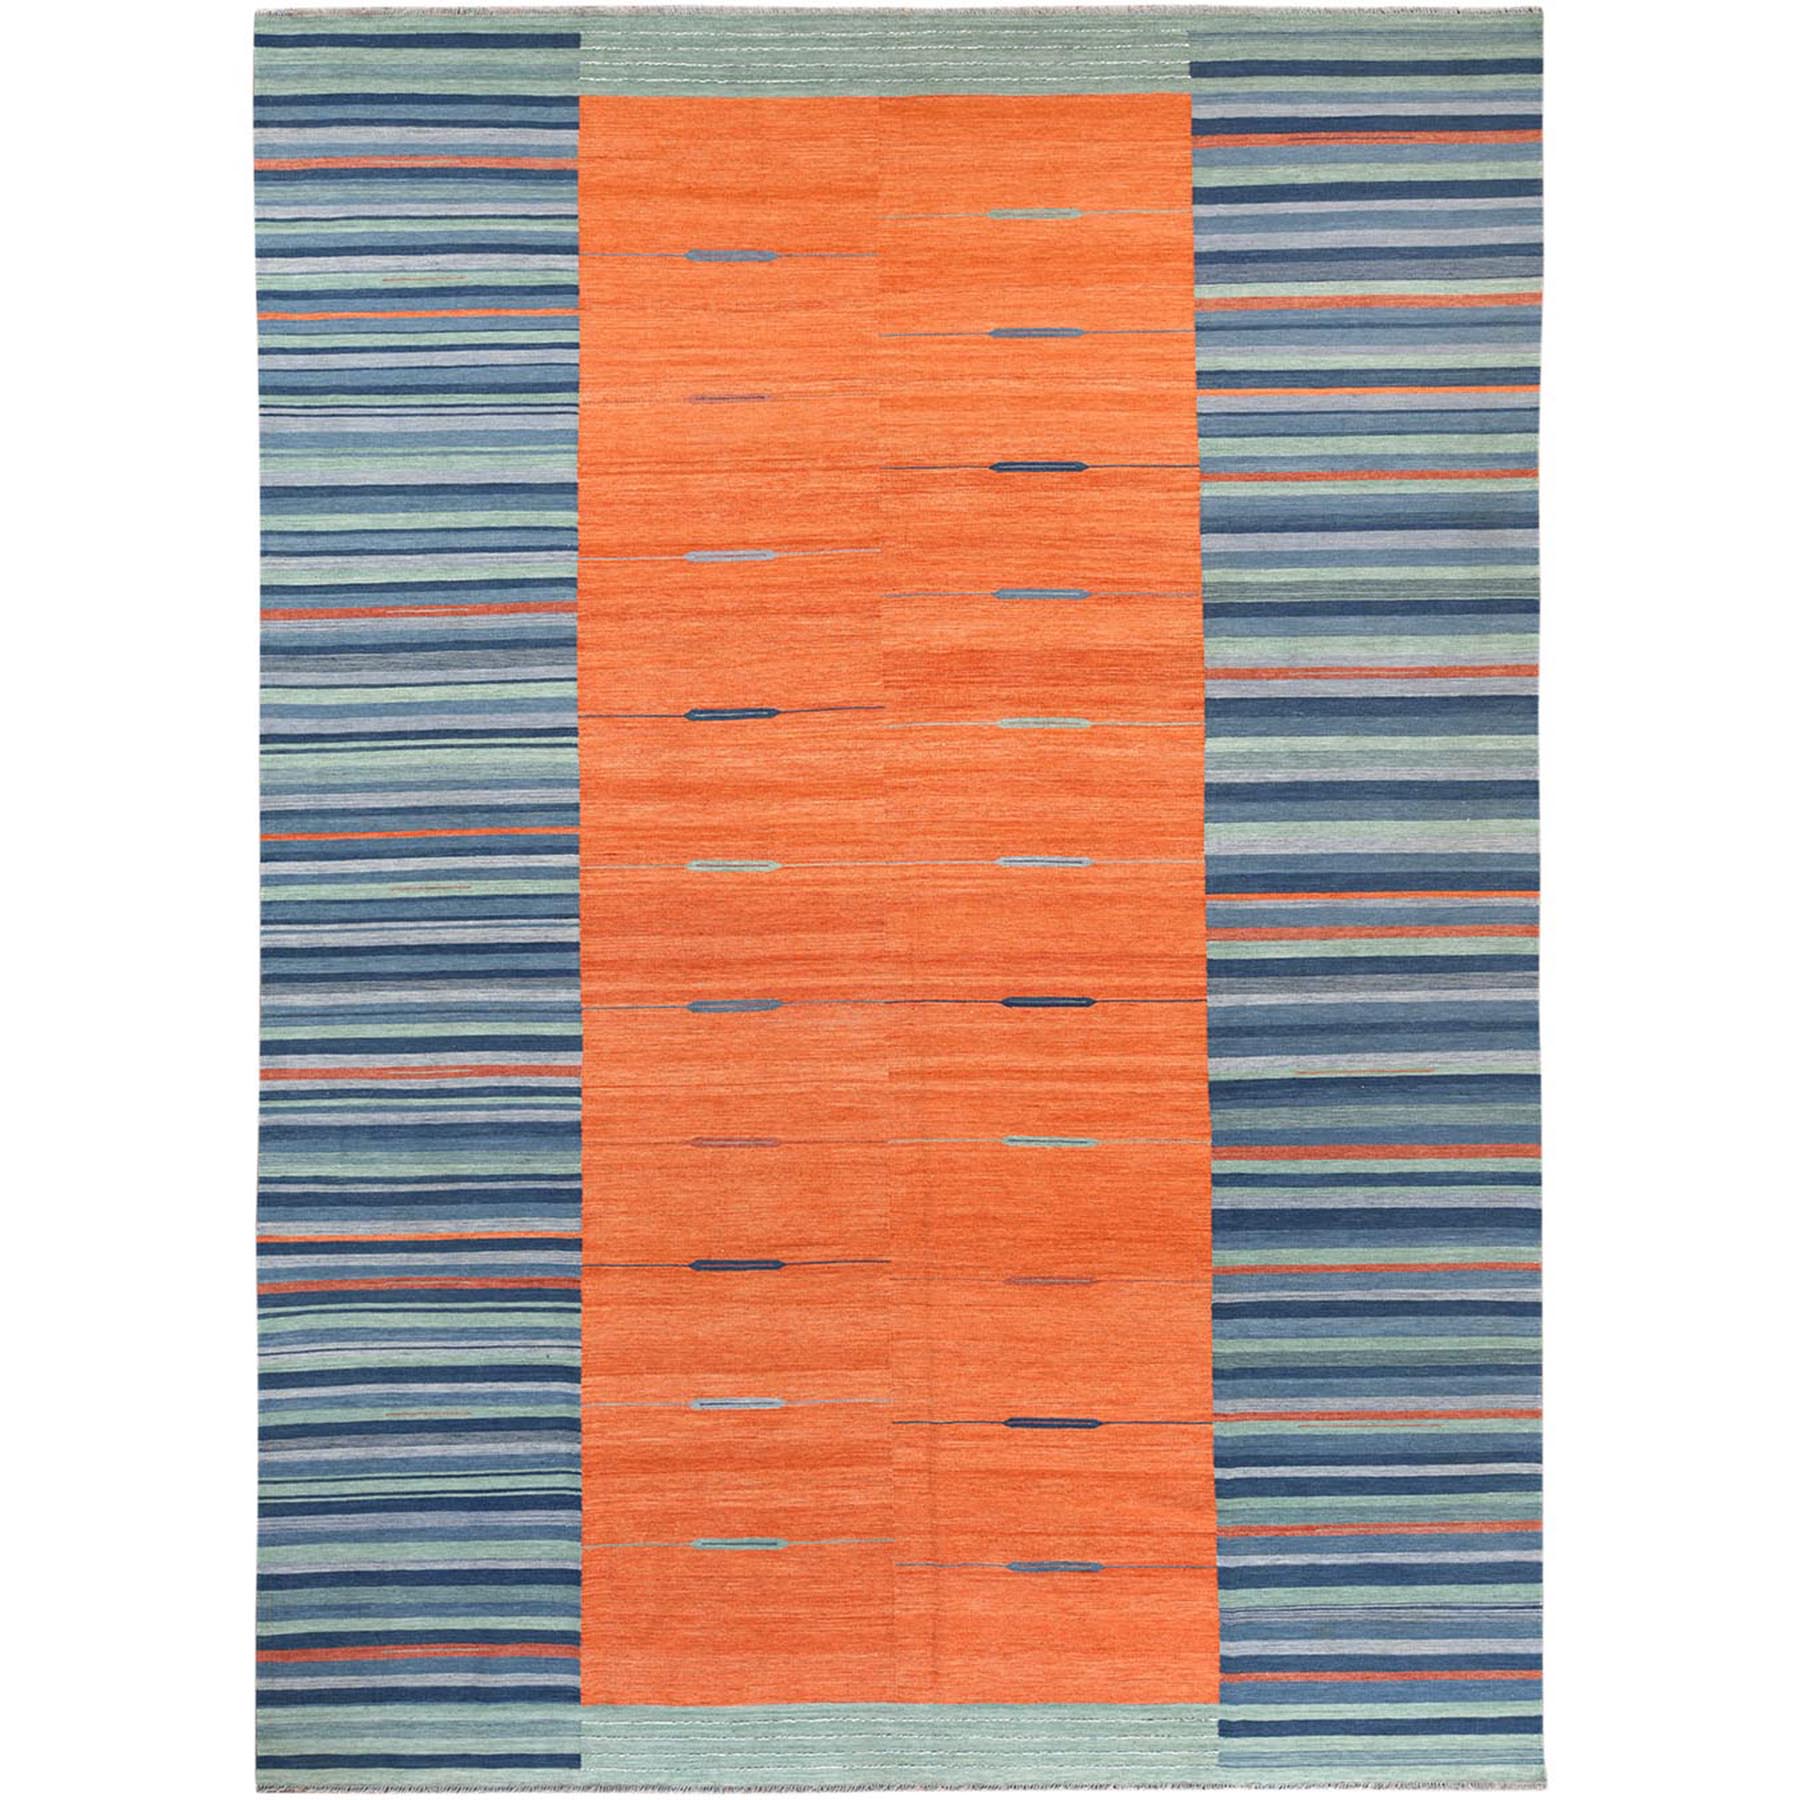 Modern & Contemporary Wool Hand-Woven Area Rug 10'4